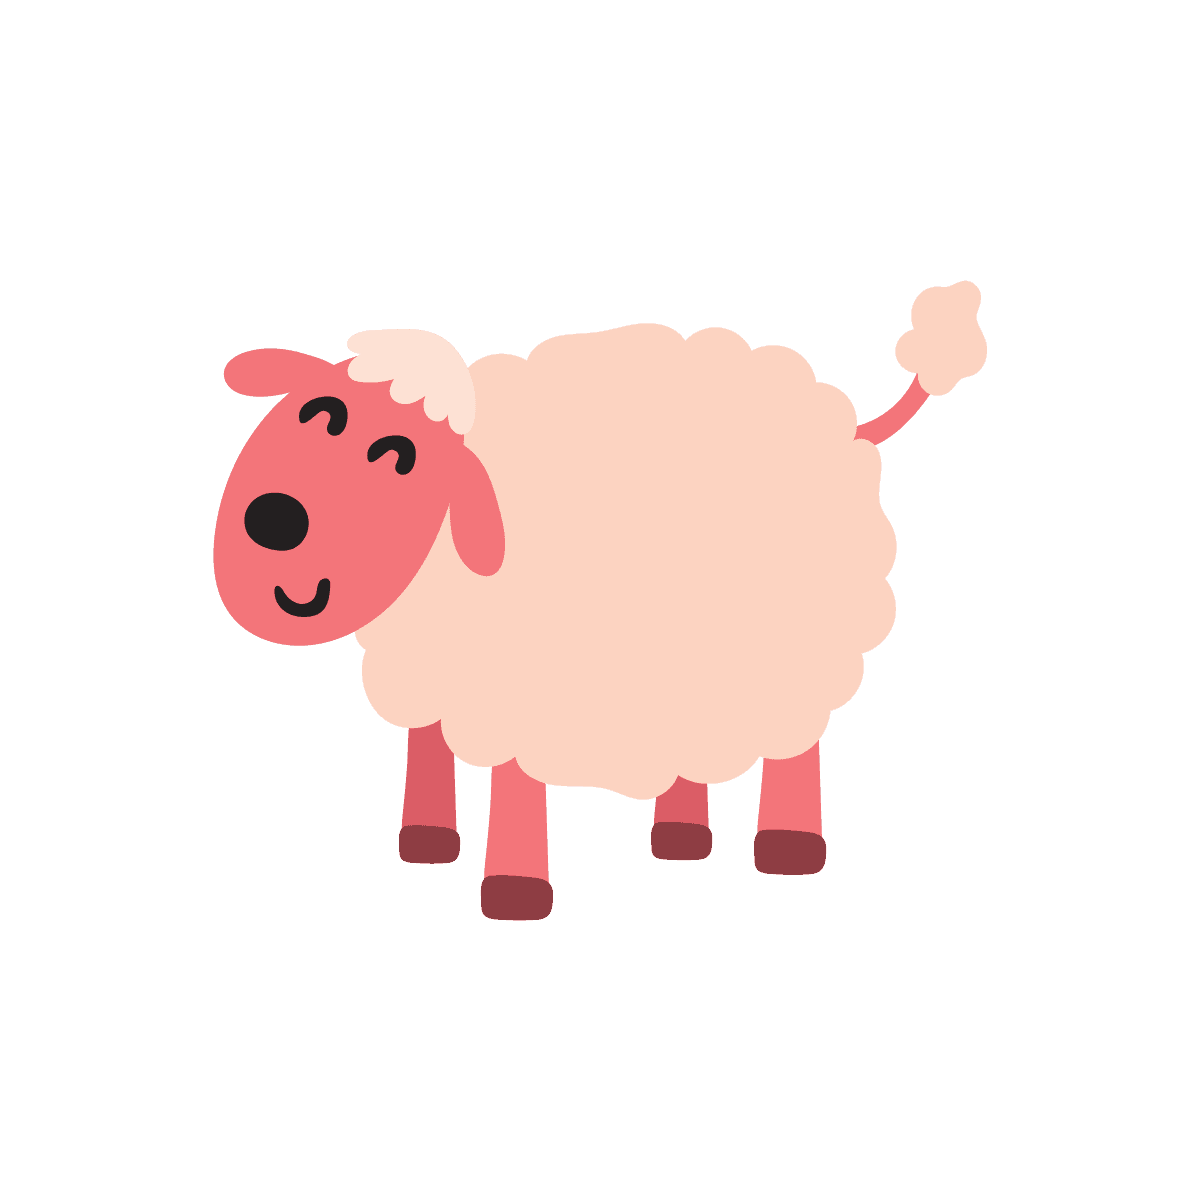 cute sheep illustration for children’s educational materials